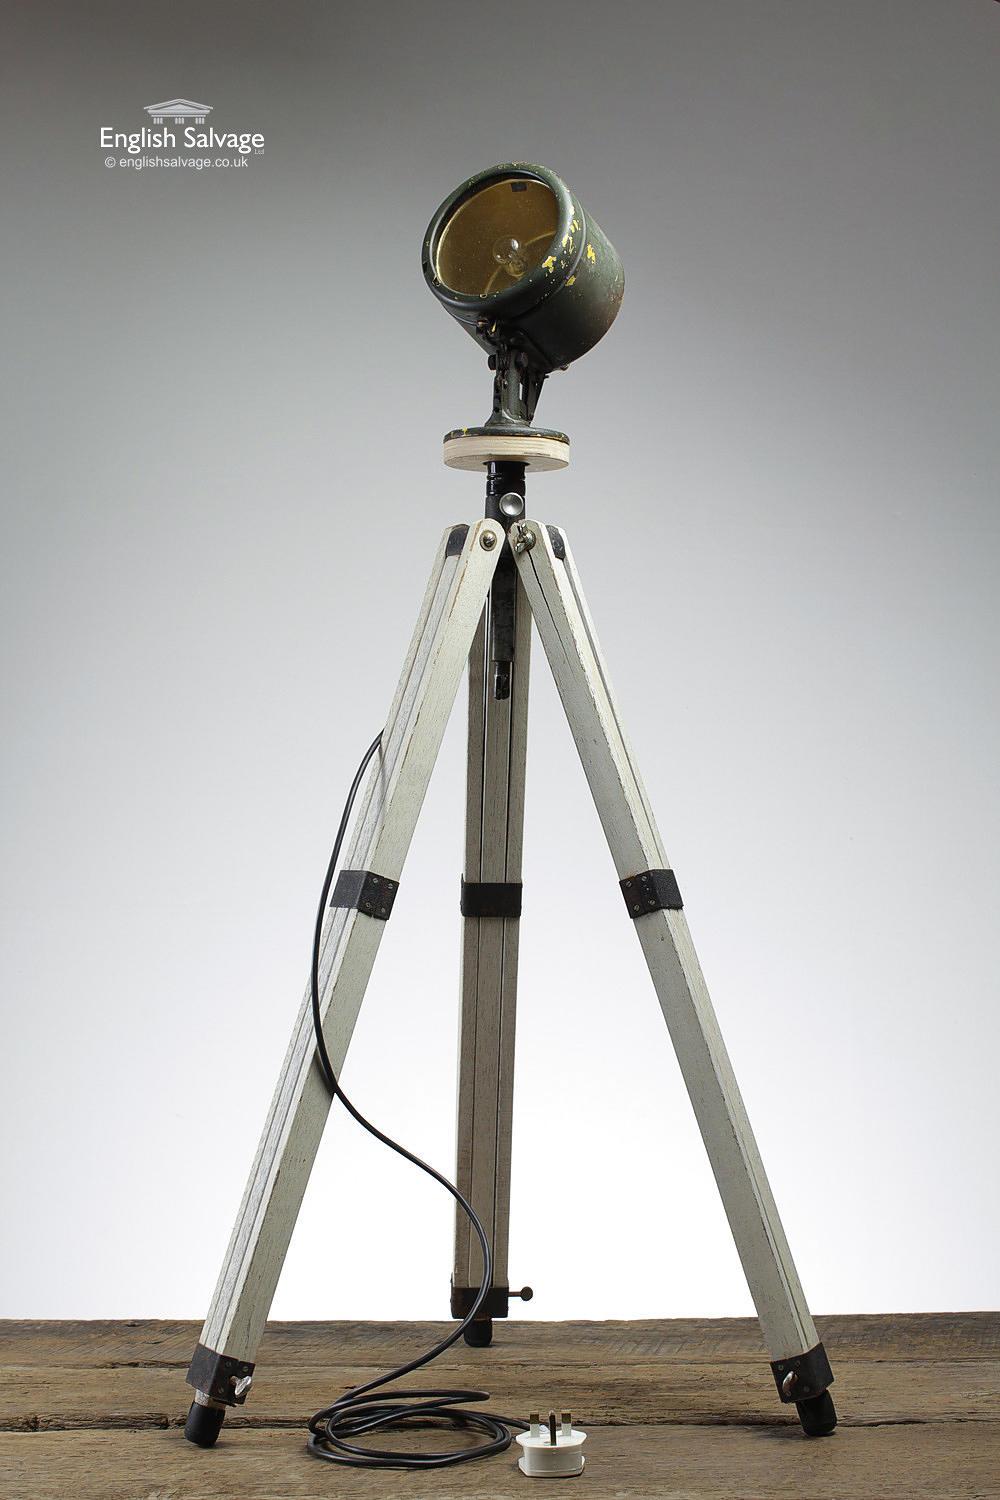 Reclaimed industrial floor light with a painted wooden extendable tripod base and a fully adjustable metal spotlight which has been rewired. The height can be adjusted roughly 98cm to 170cm high. The legs are a bit stiff to adjust and there are a